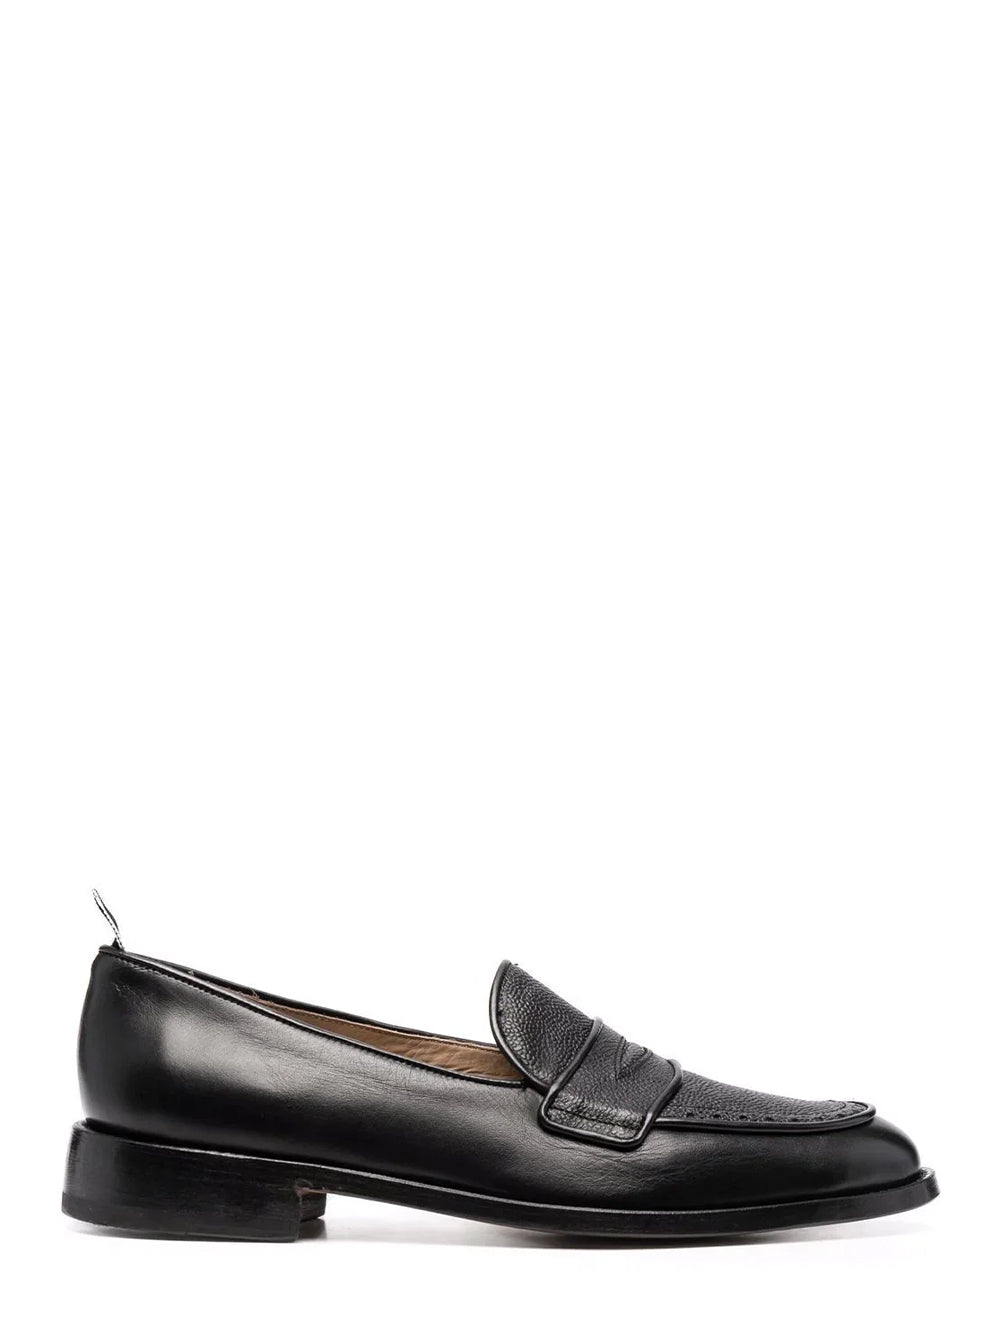 Vitello Calf Leather Flexible Leather Sole Soft Penny Loafer (Black)